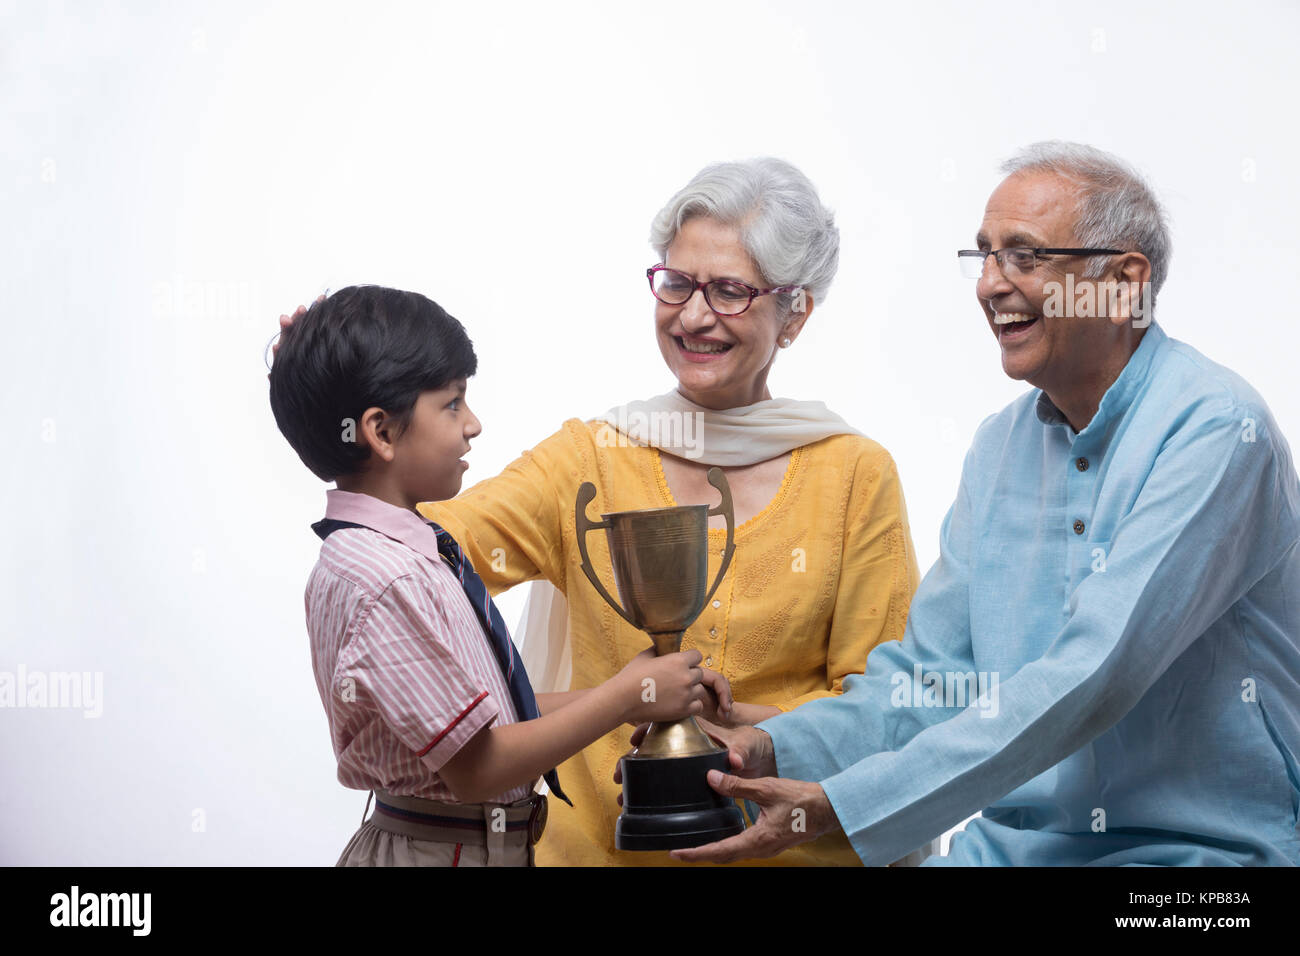 Boy showing trophy to grandparents Stock Photo